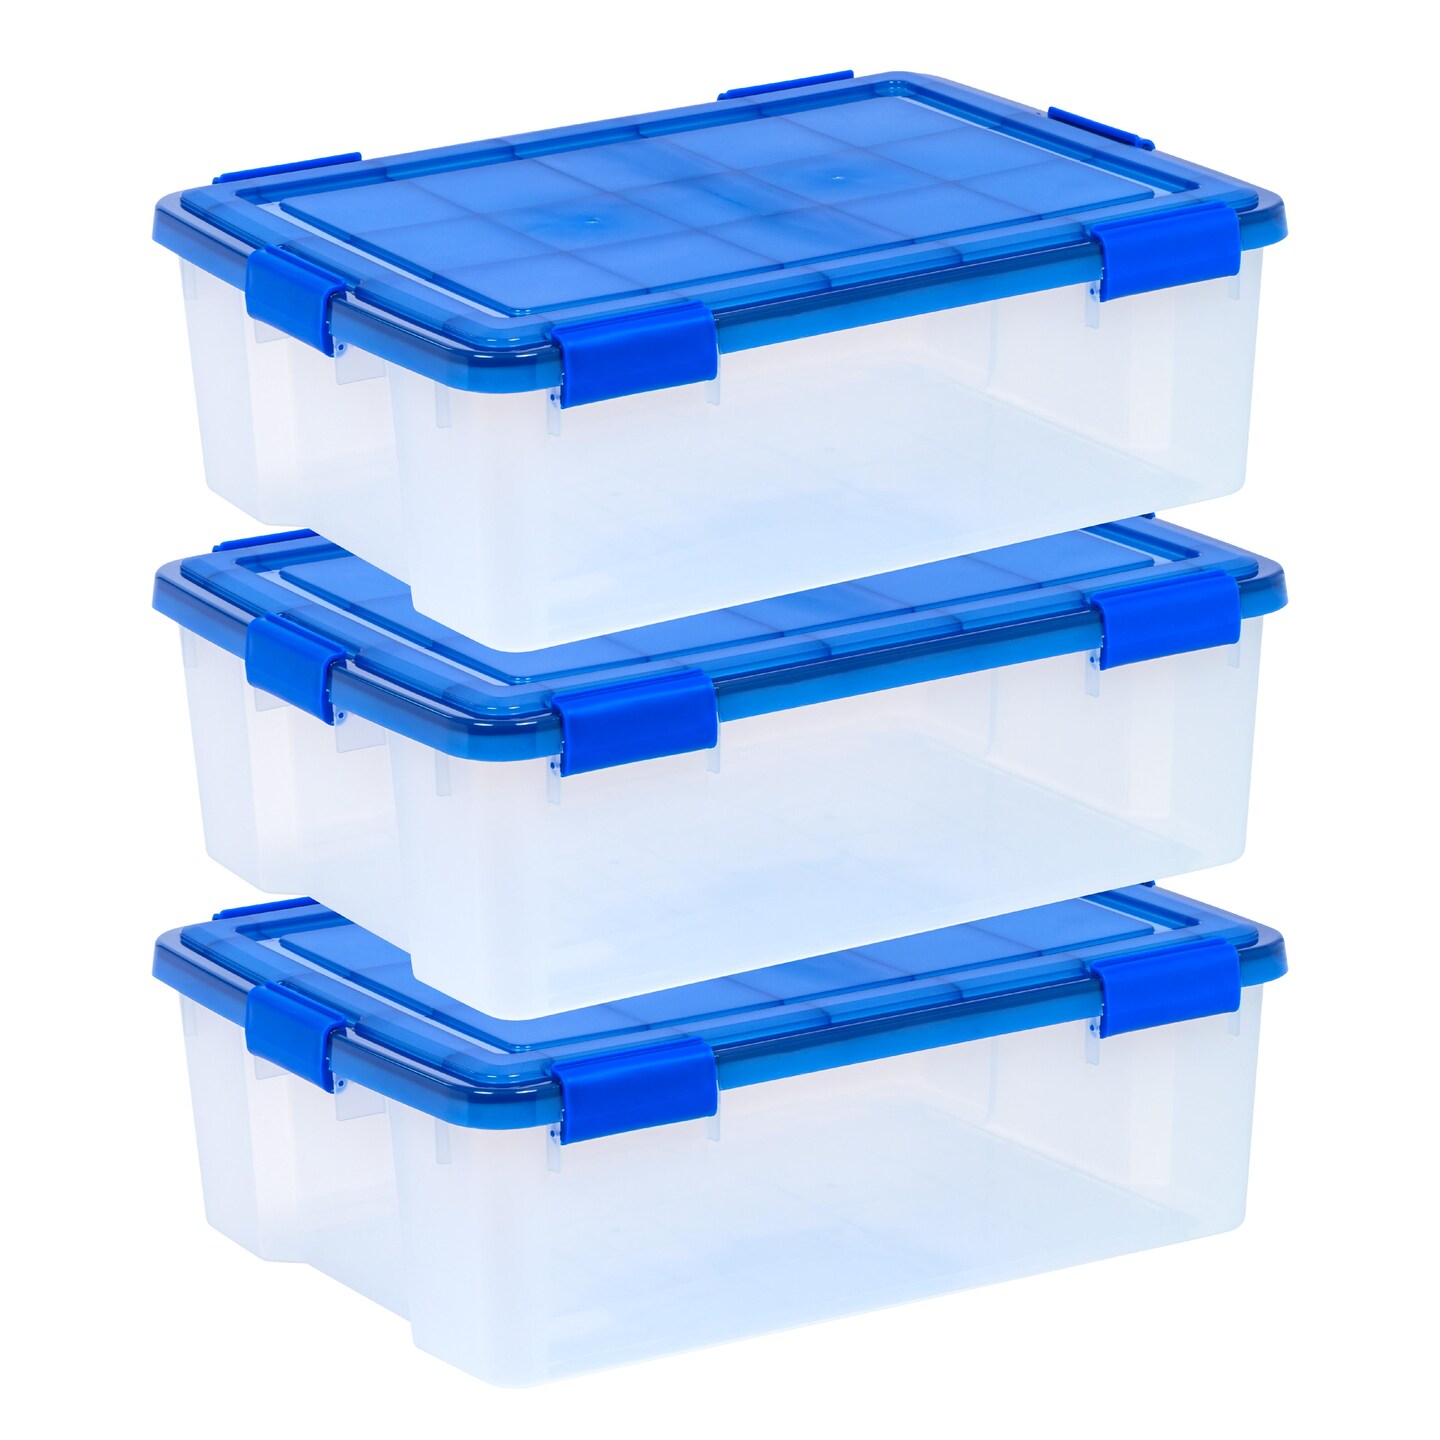 IRIS USA 3Pack 41qt WEATHERPRO Airtight Plastic Storage Bin with Lid and Seal and Secure Latching Buckles